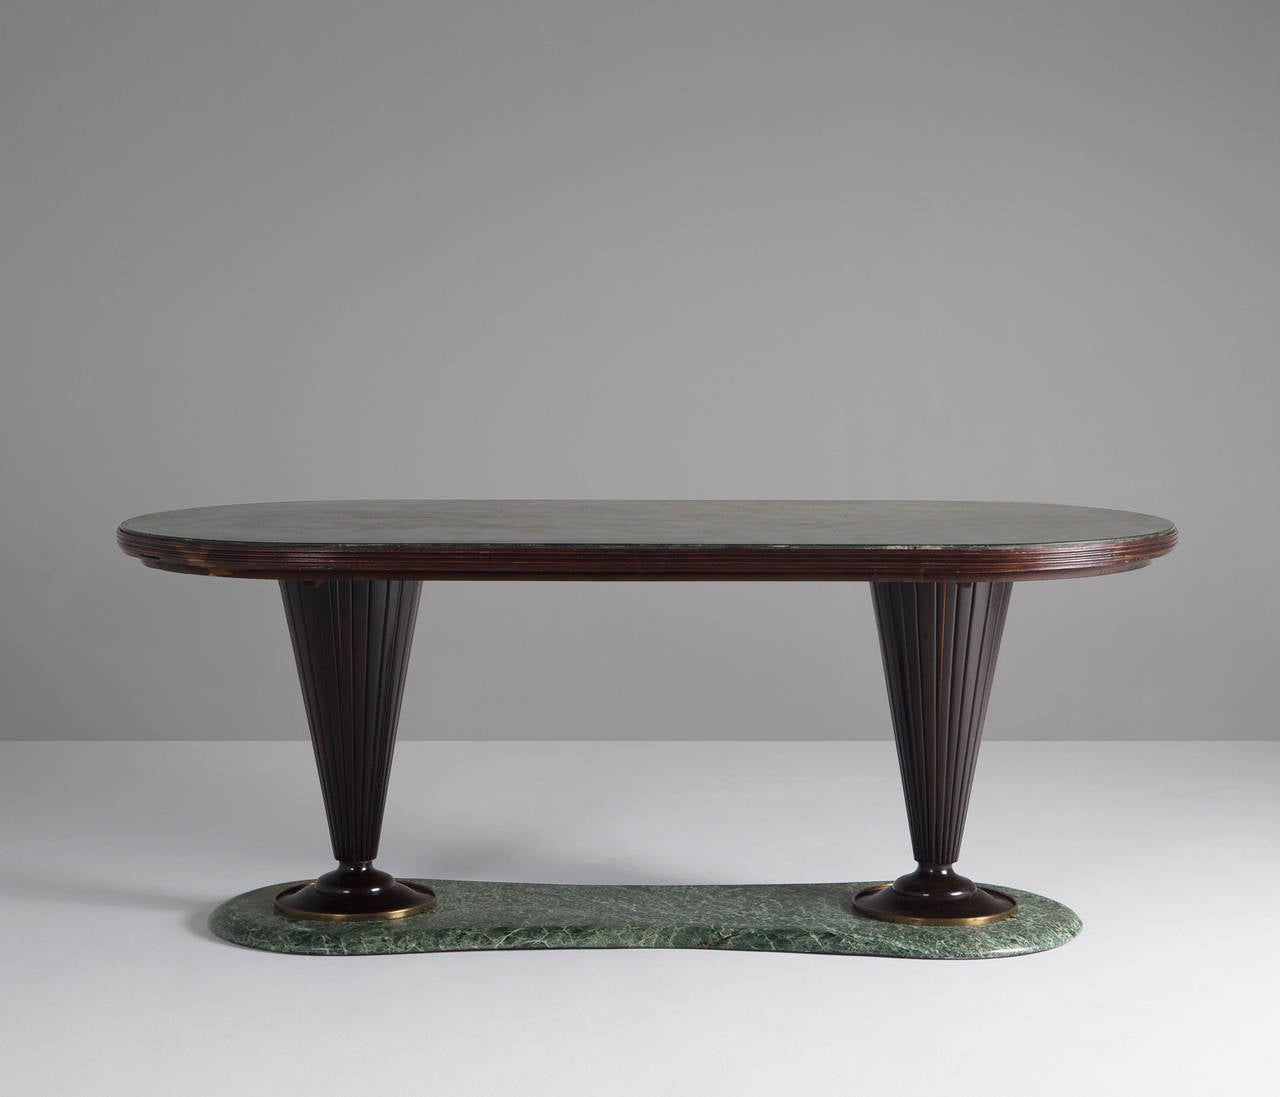 Table, in marble, wood and brass, by Vittorio Dassi, Italy, 1950s.

Elegant dining or centre table by Vittorio Dassi with an Alpi Verdi marble top and base, which matches perfectly with the elegant designed tapered legs. The stunning woodwork, brass